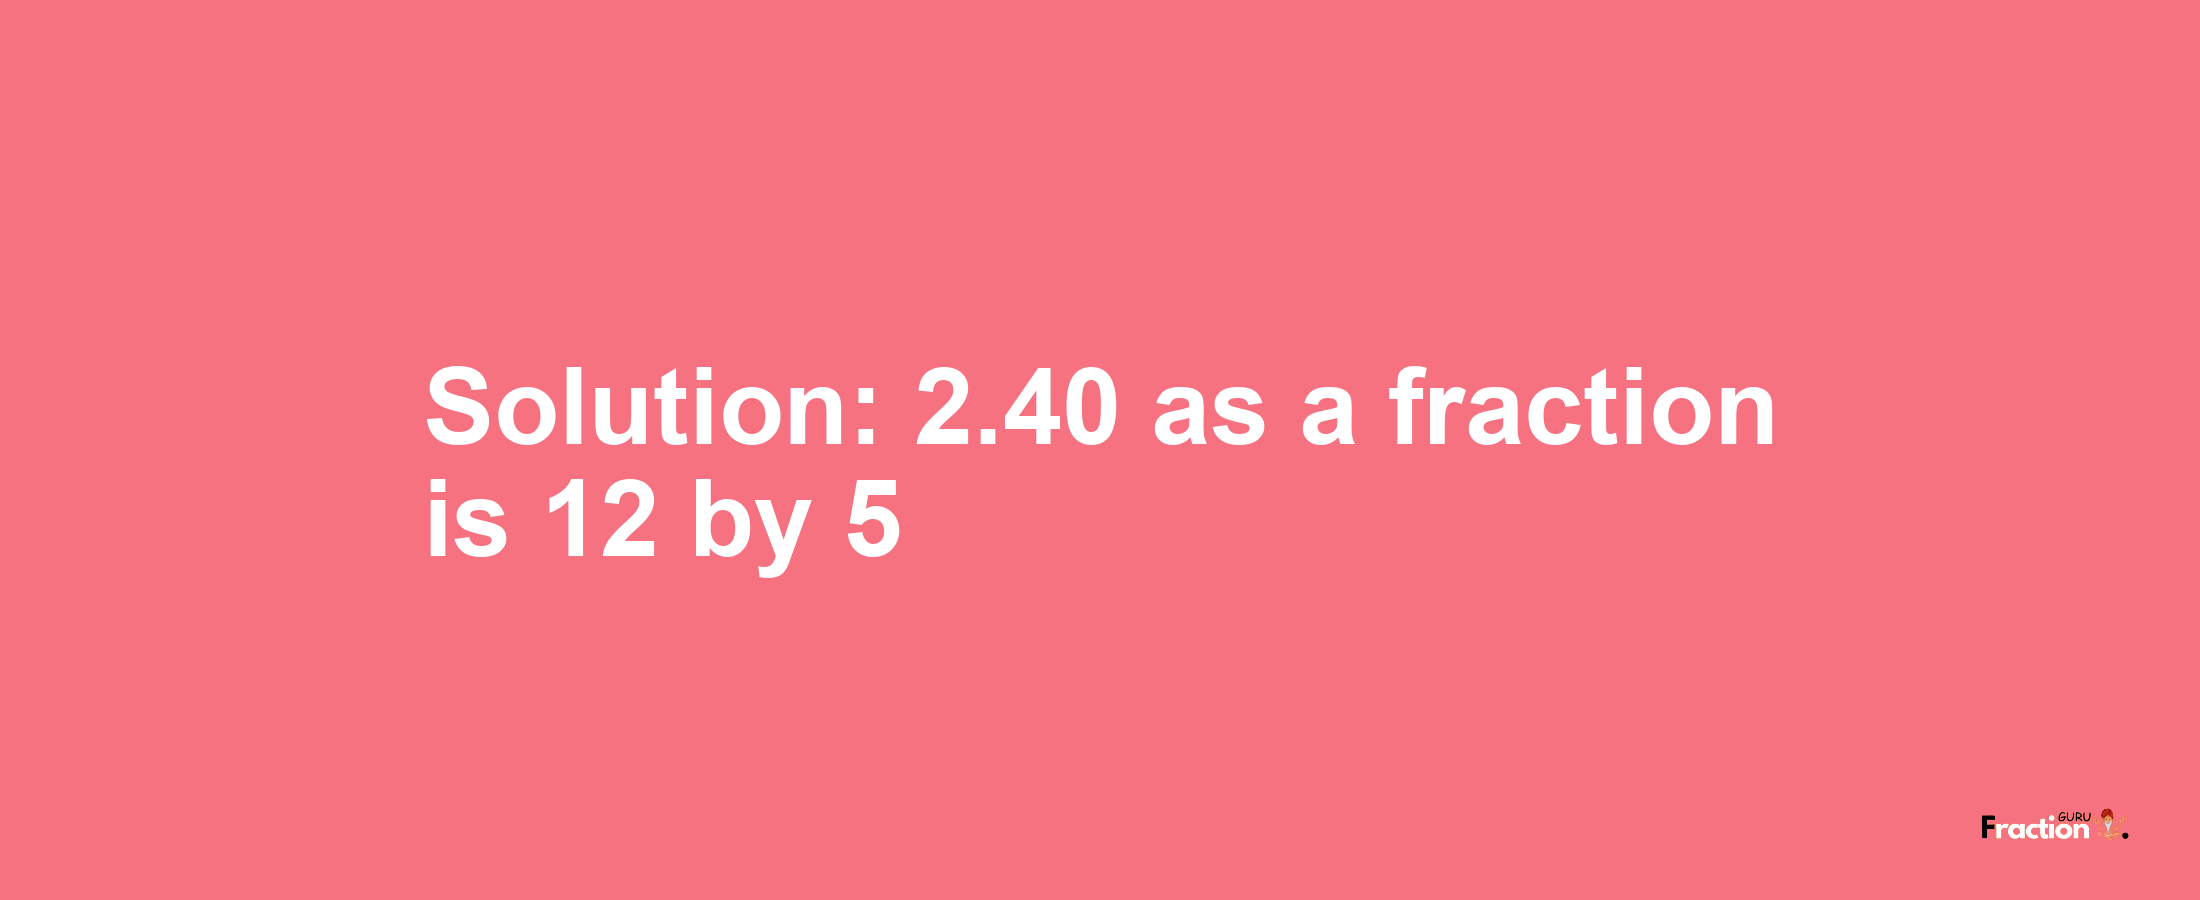 Solution:2.40 as a fraction is 12/5